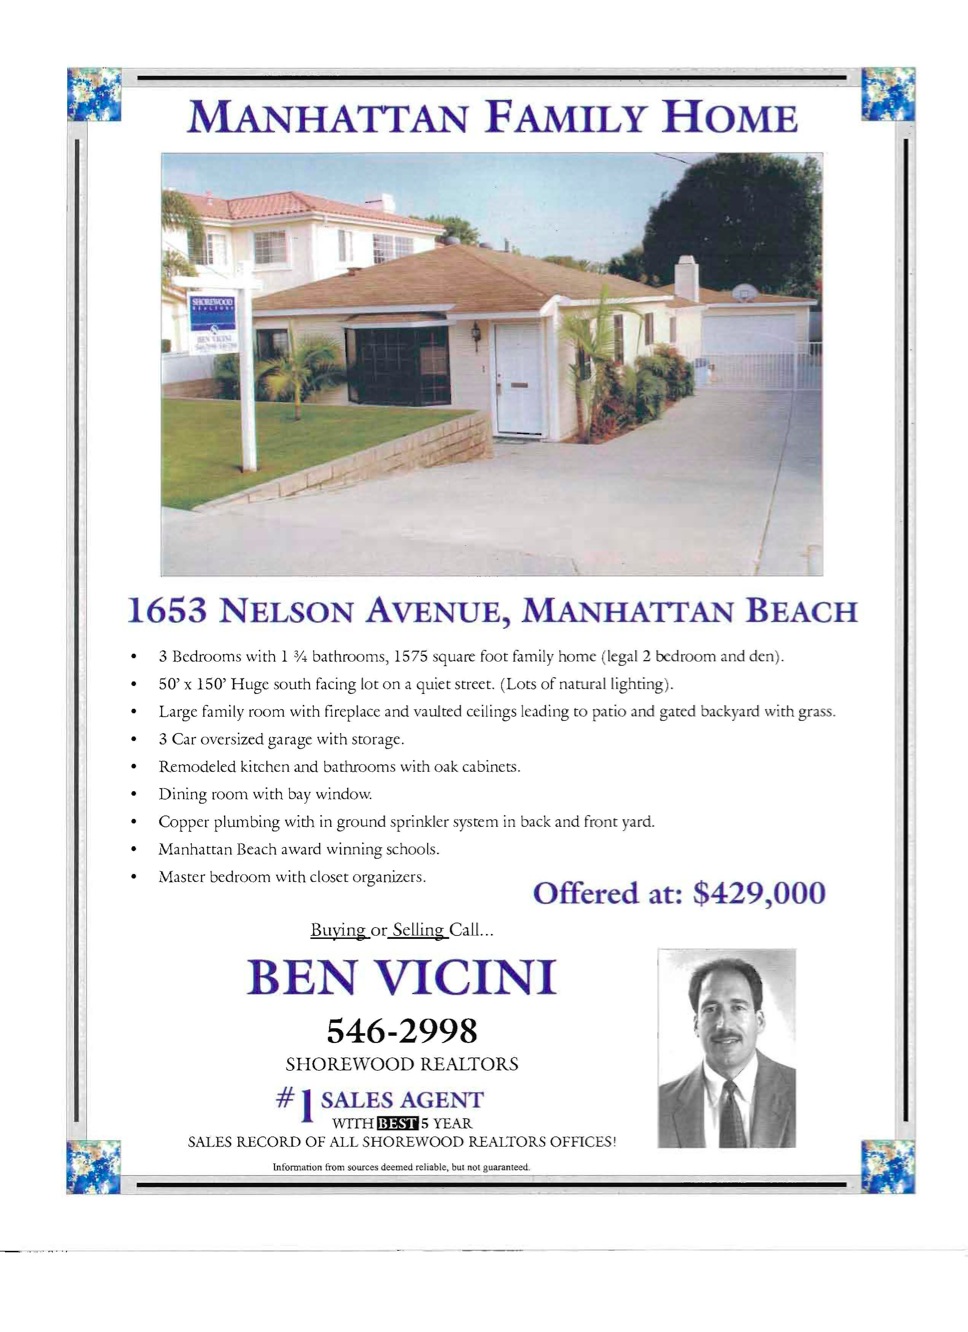 Vicini's Past Listings & Sales_Page_44